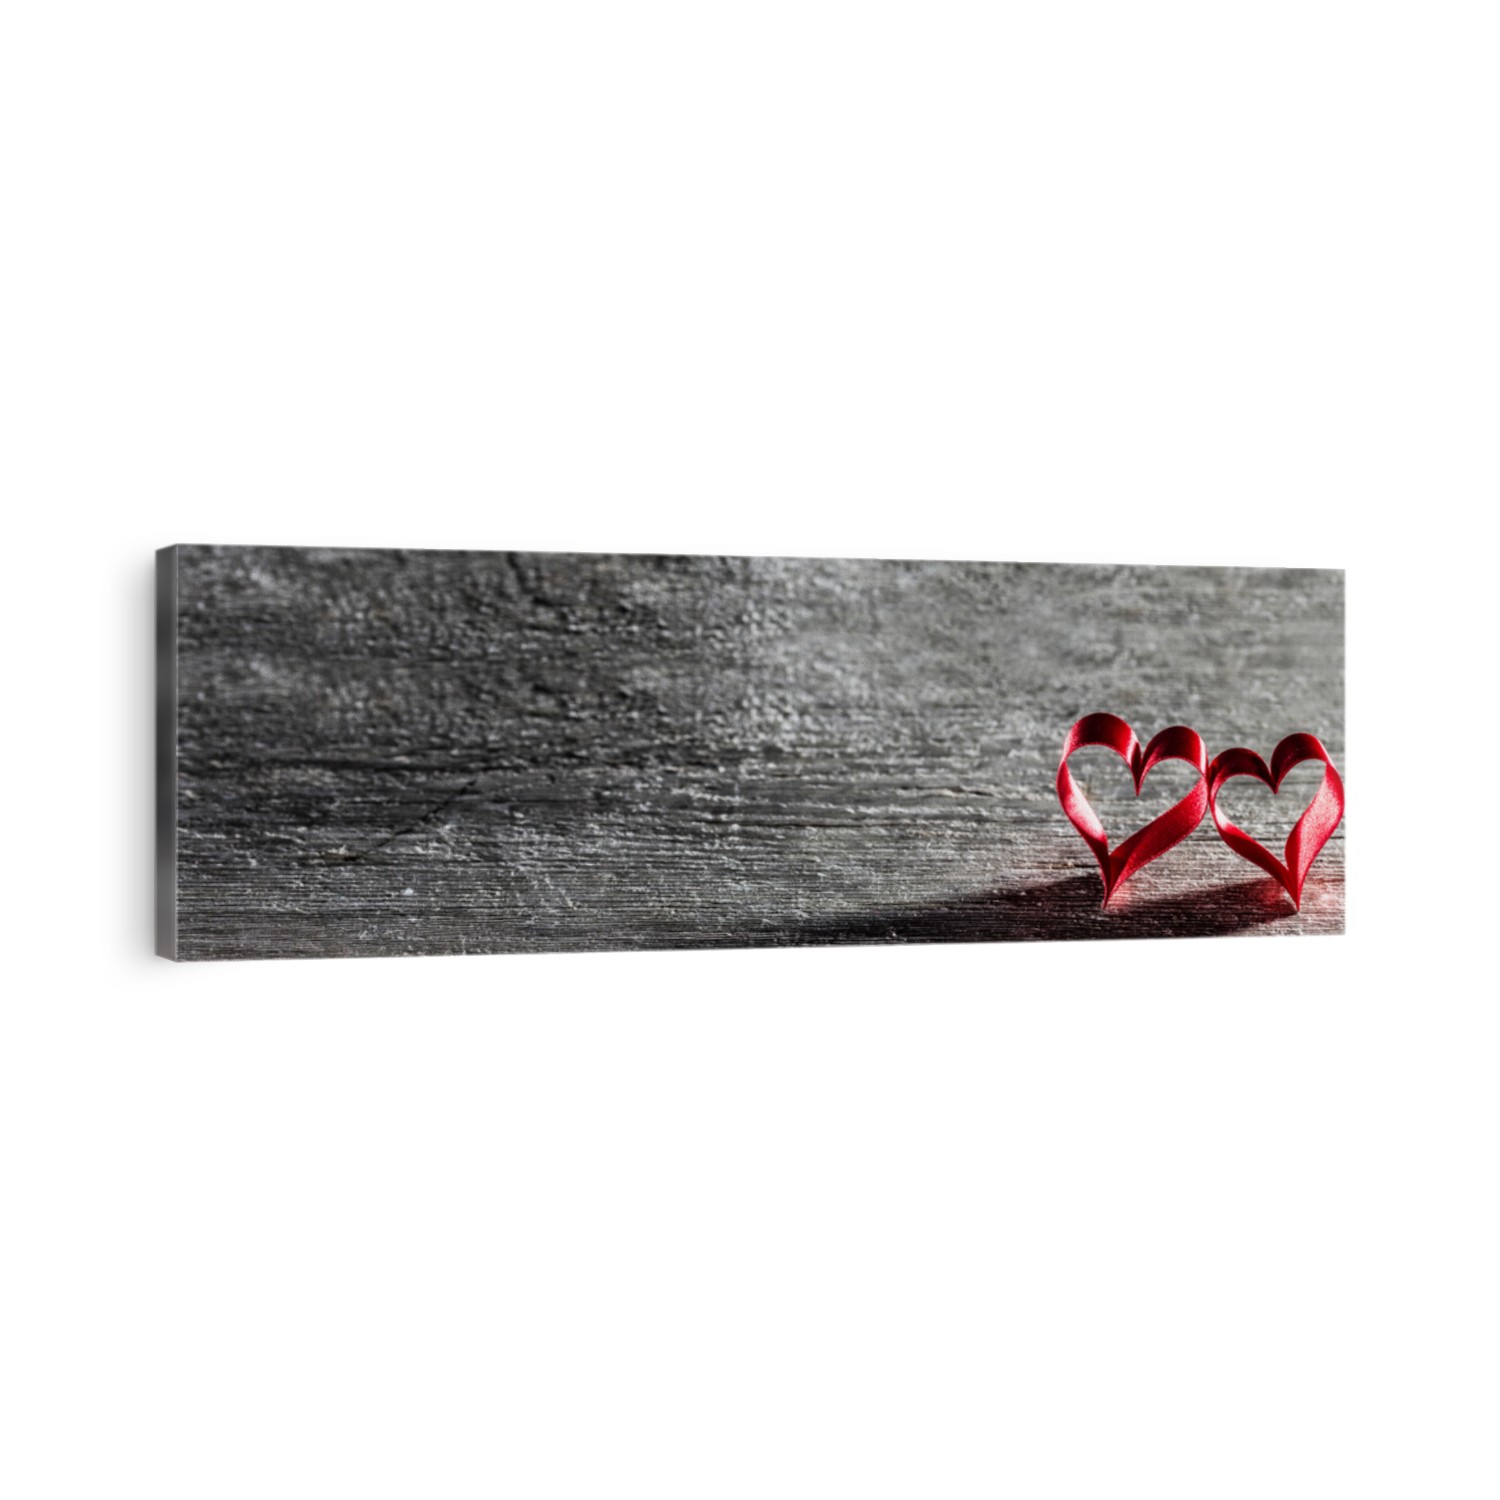 Two red ribbon hearts on wooden background with copy space for text, Valentines day concept